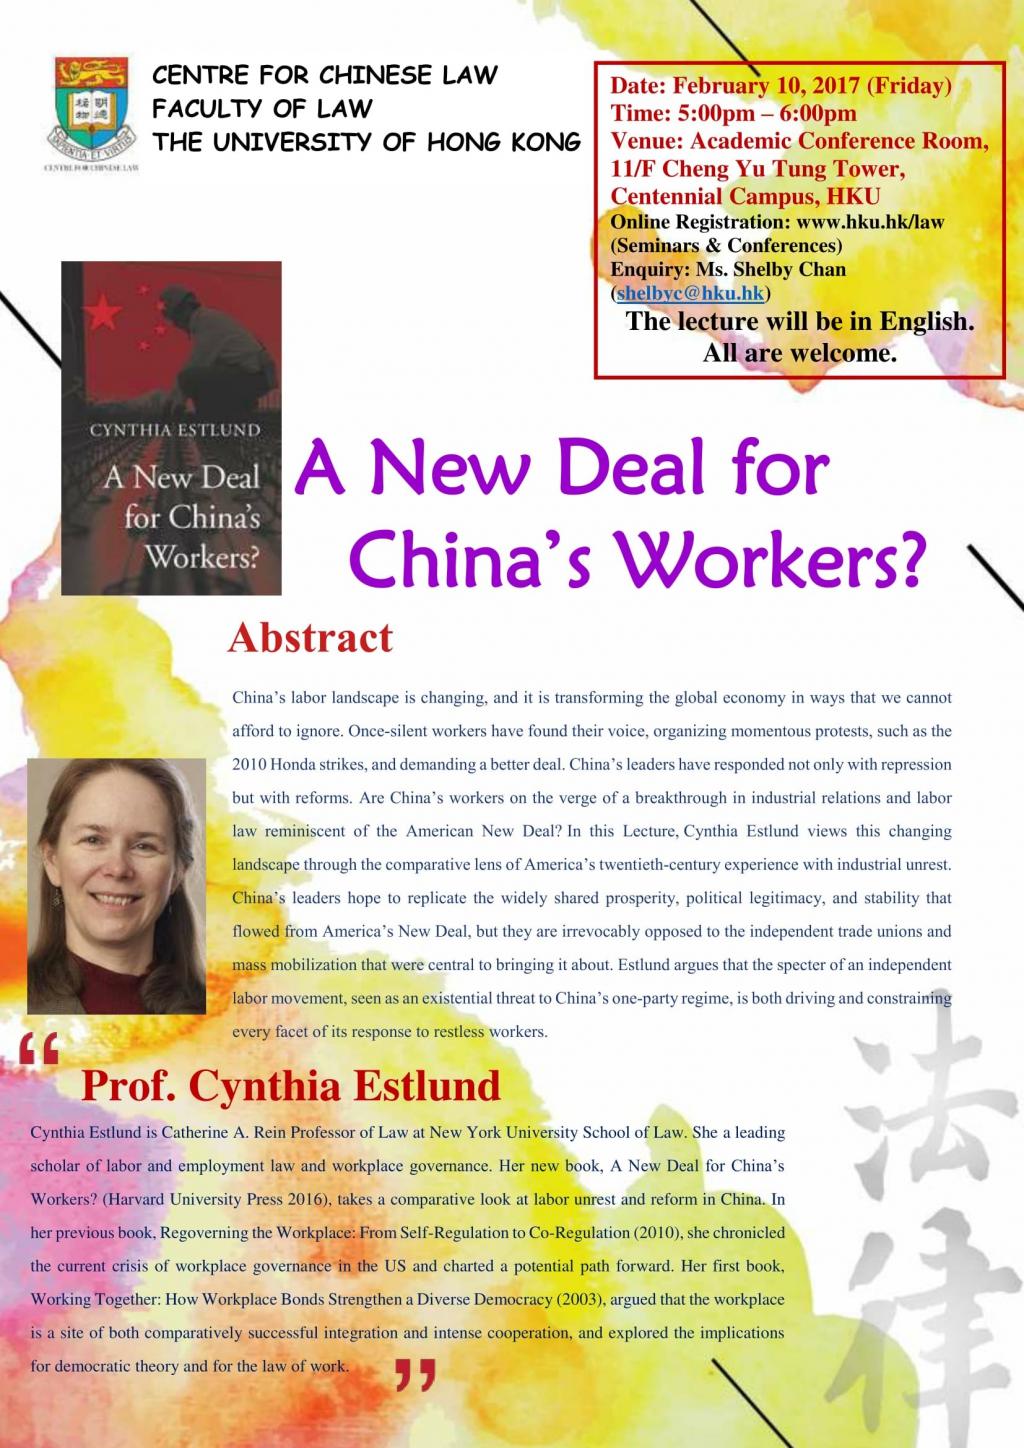 CCL Talk: A New Deal for China's Workers?